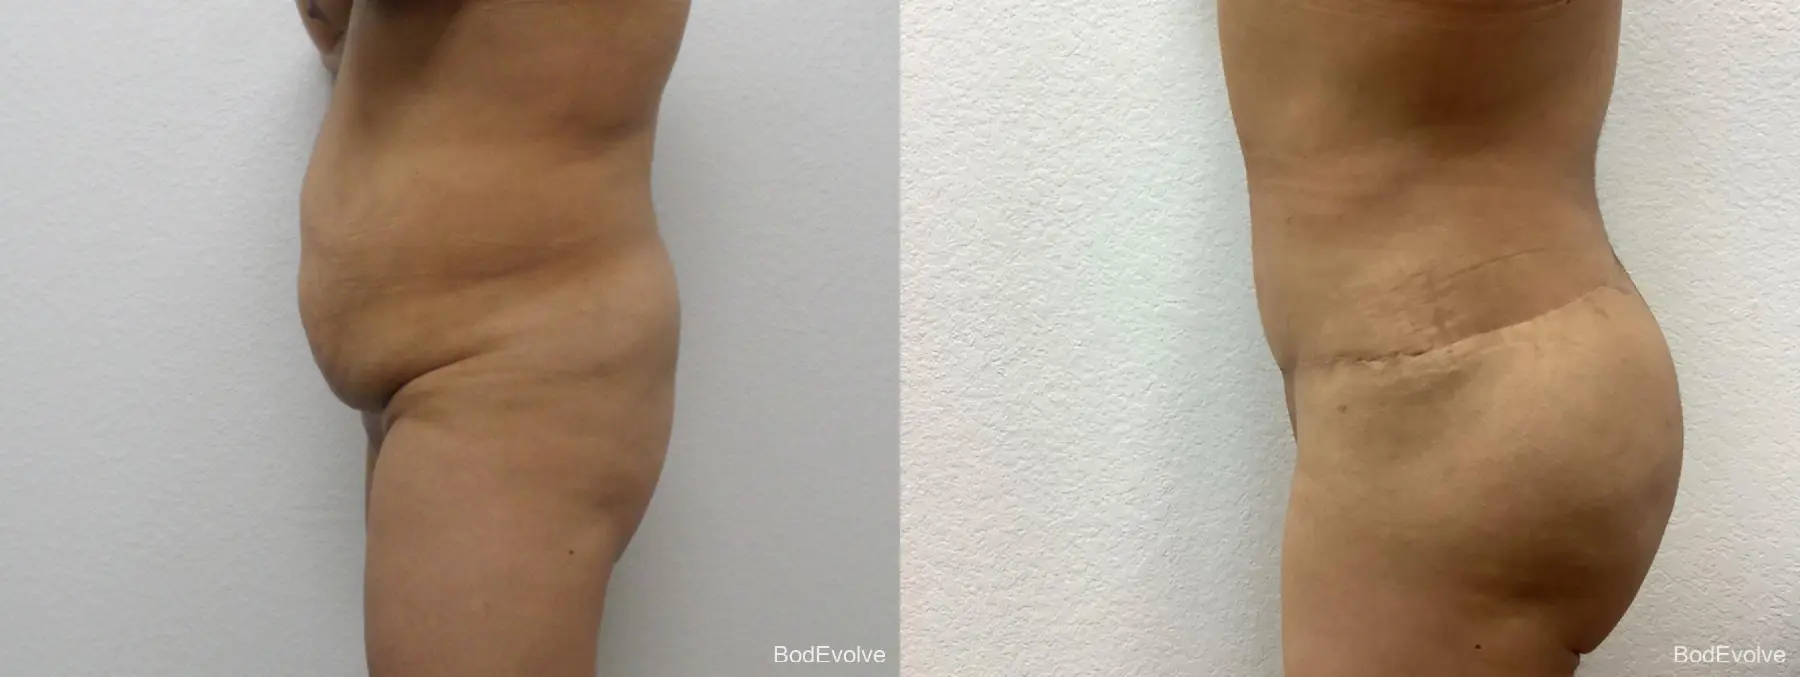 Tummy Tuck: Patient 7 - Before and After 2